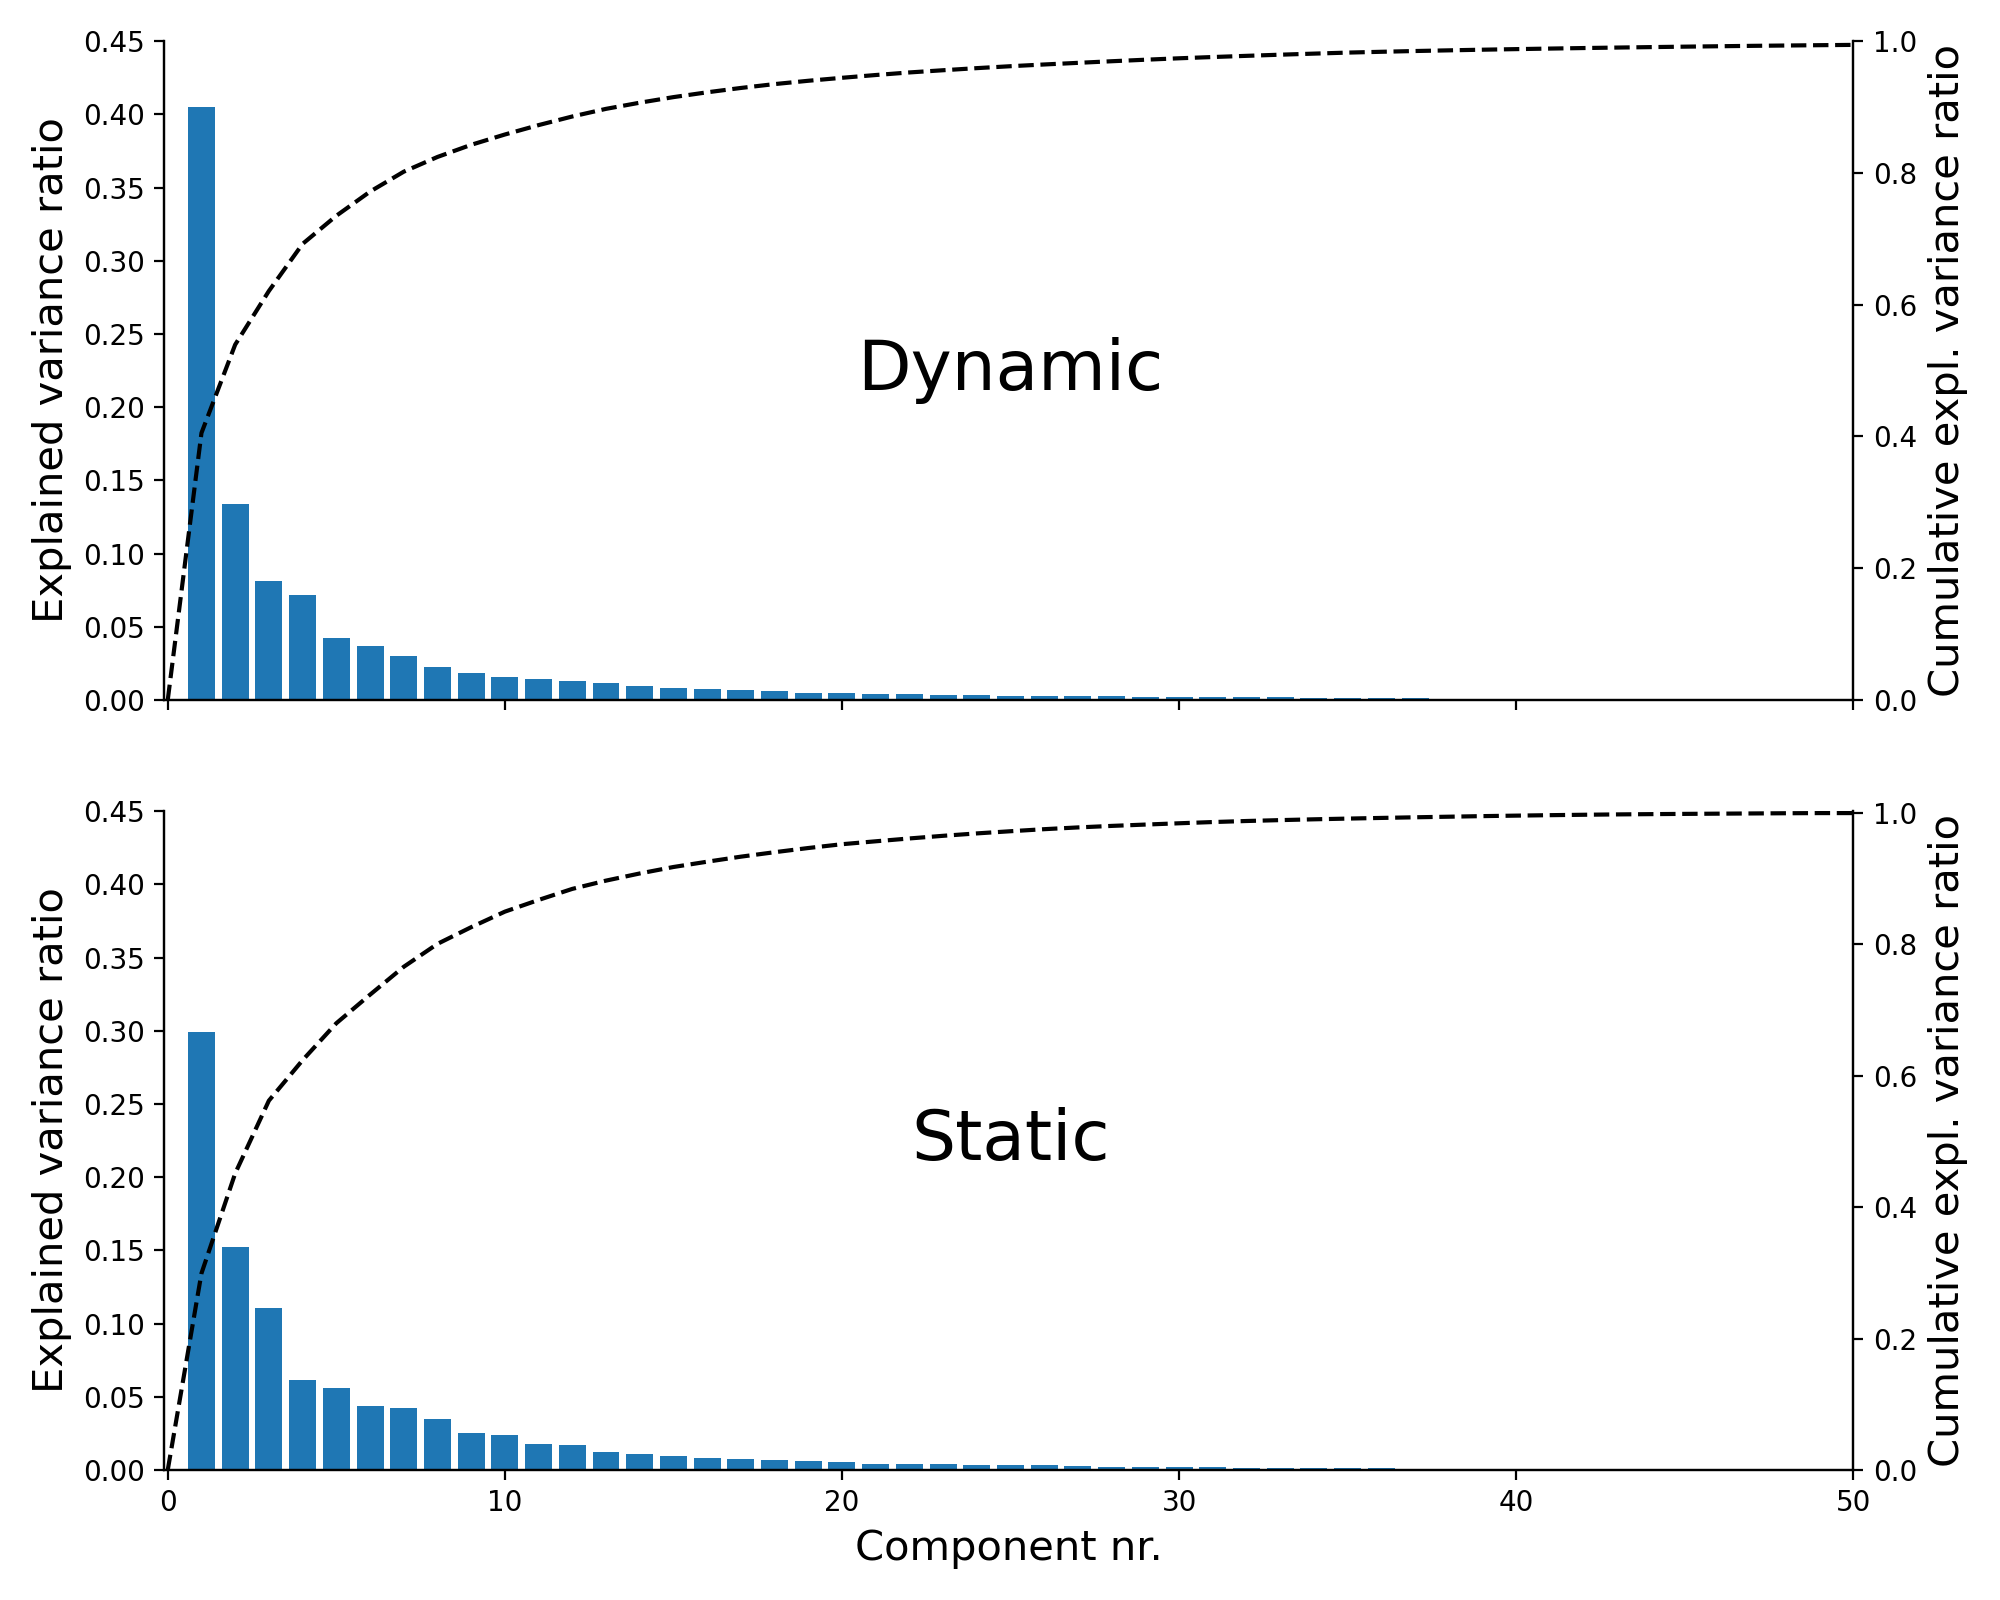 The explained variance ratio of each PCA component (bars; left y-axis) and the cumulative explained variance ratio (dashed line; right y-axis) for the PCA done on the dynamic features (top) and static features (bottom).